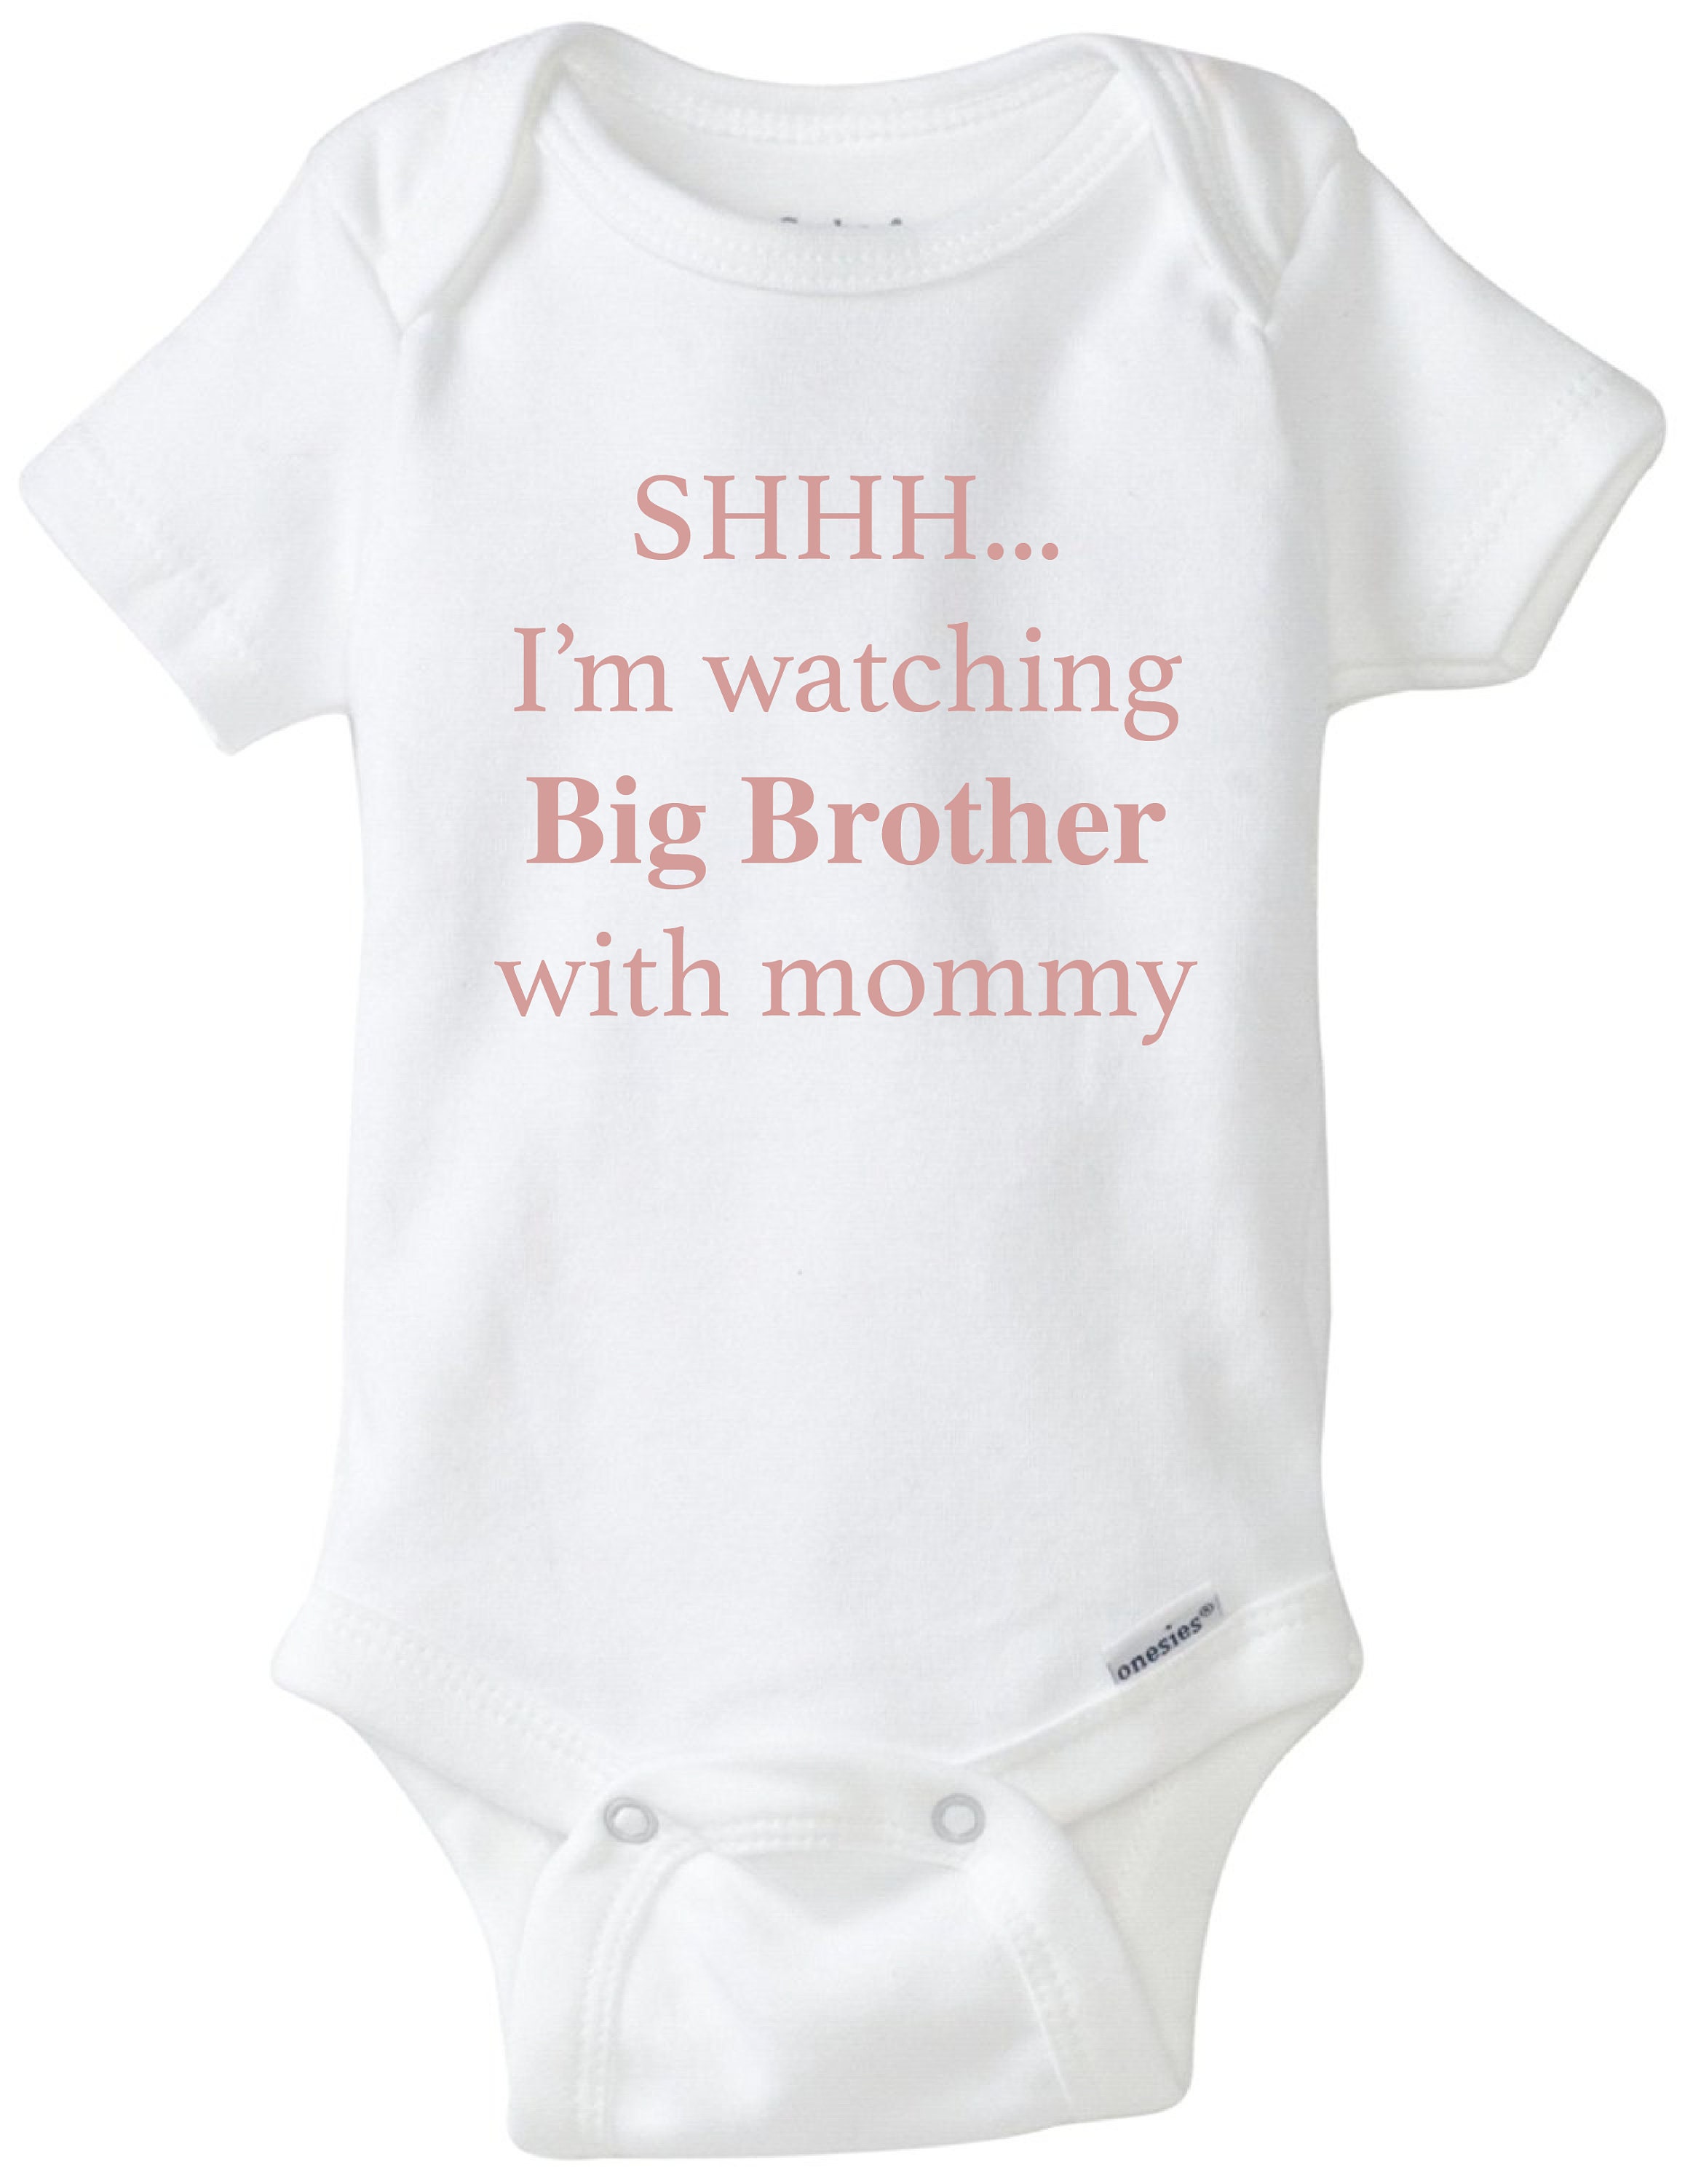 Big Brother Baby Onesie Shhh Im Watching Big Brother picture